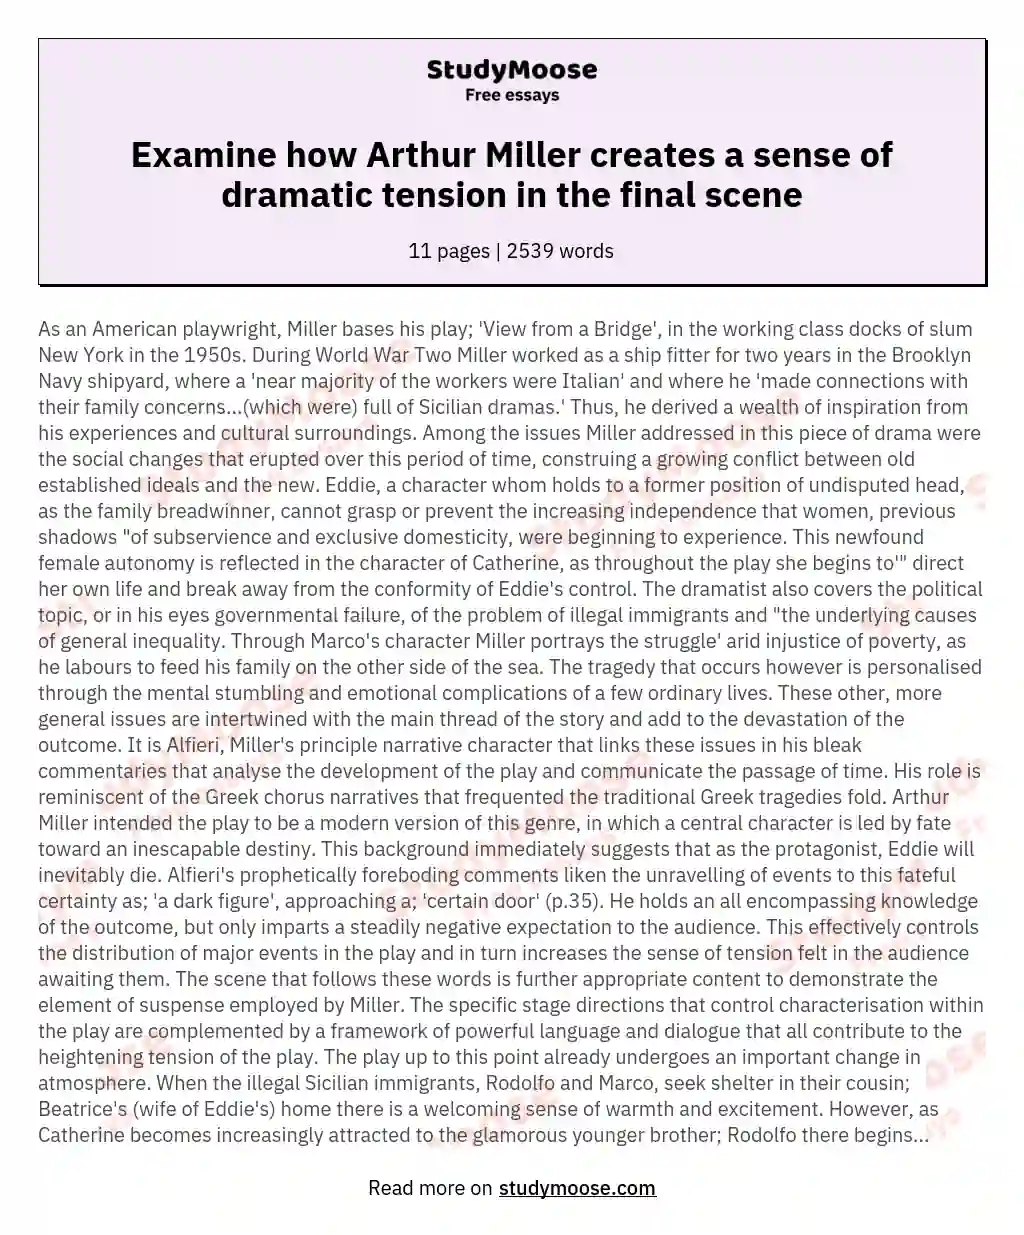 Examine how Arthur Miller creates a sense of dramatic tension in the final scene